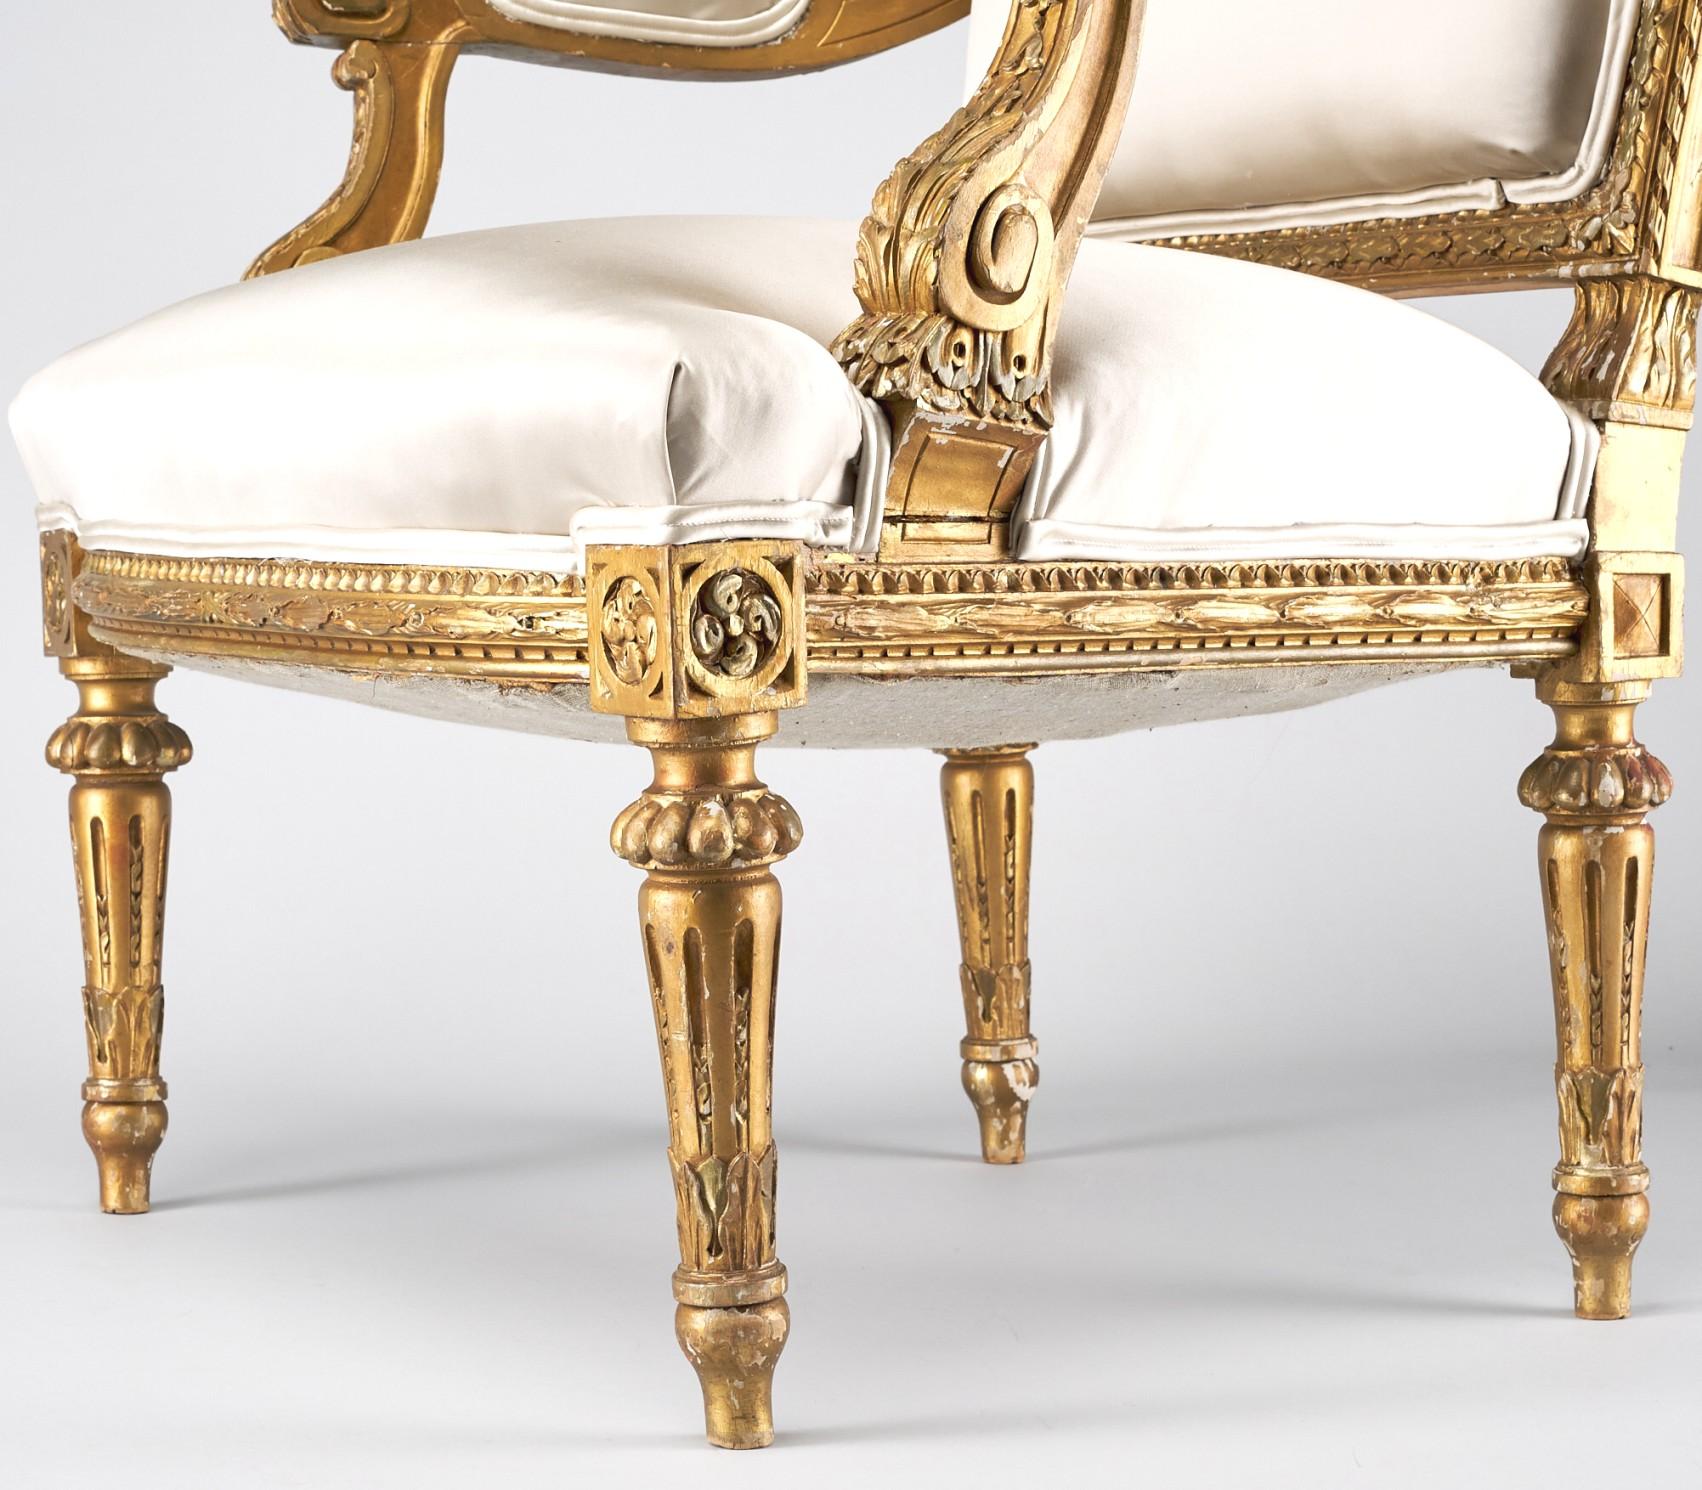 20th Century Pair of Louis XVI Style Giltwood Fauteuils / Armchairs, France Circa 1900 For Sale